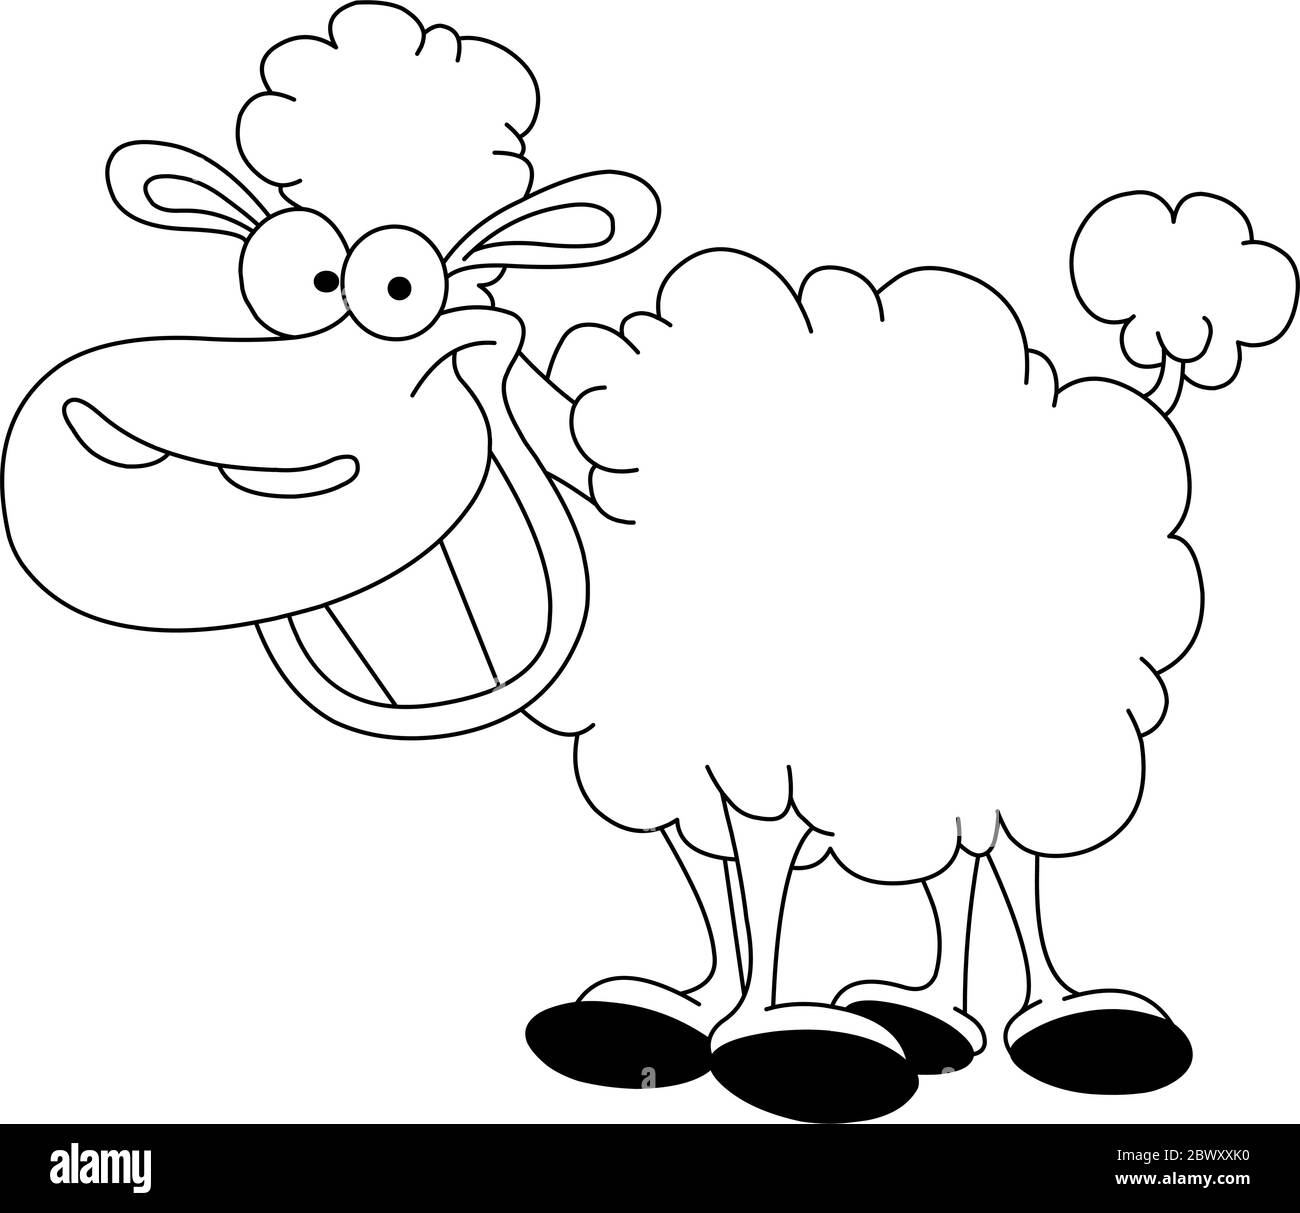 Outlined sheep Stock Vector